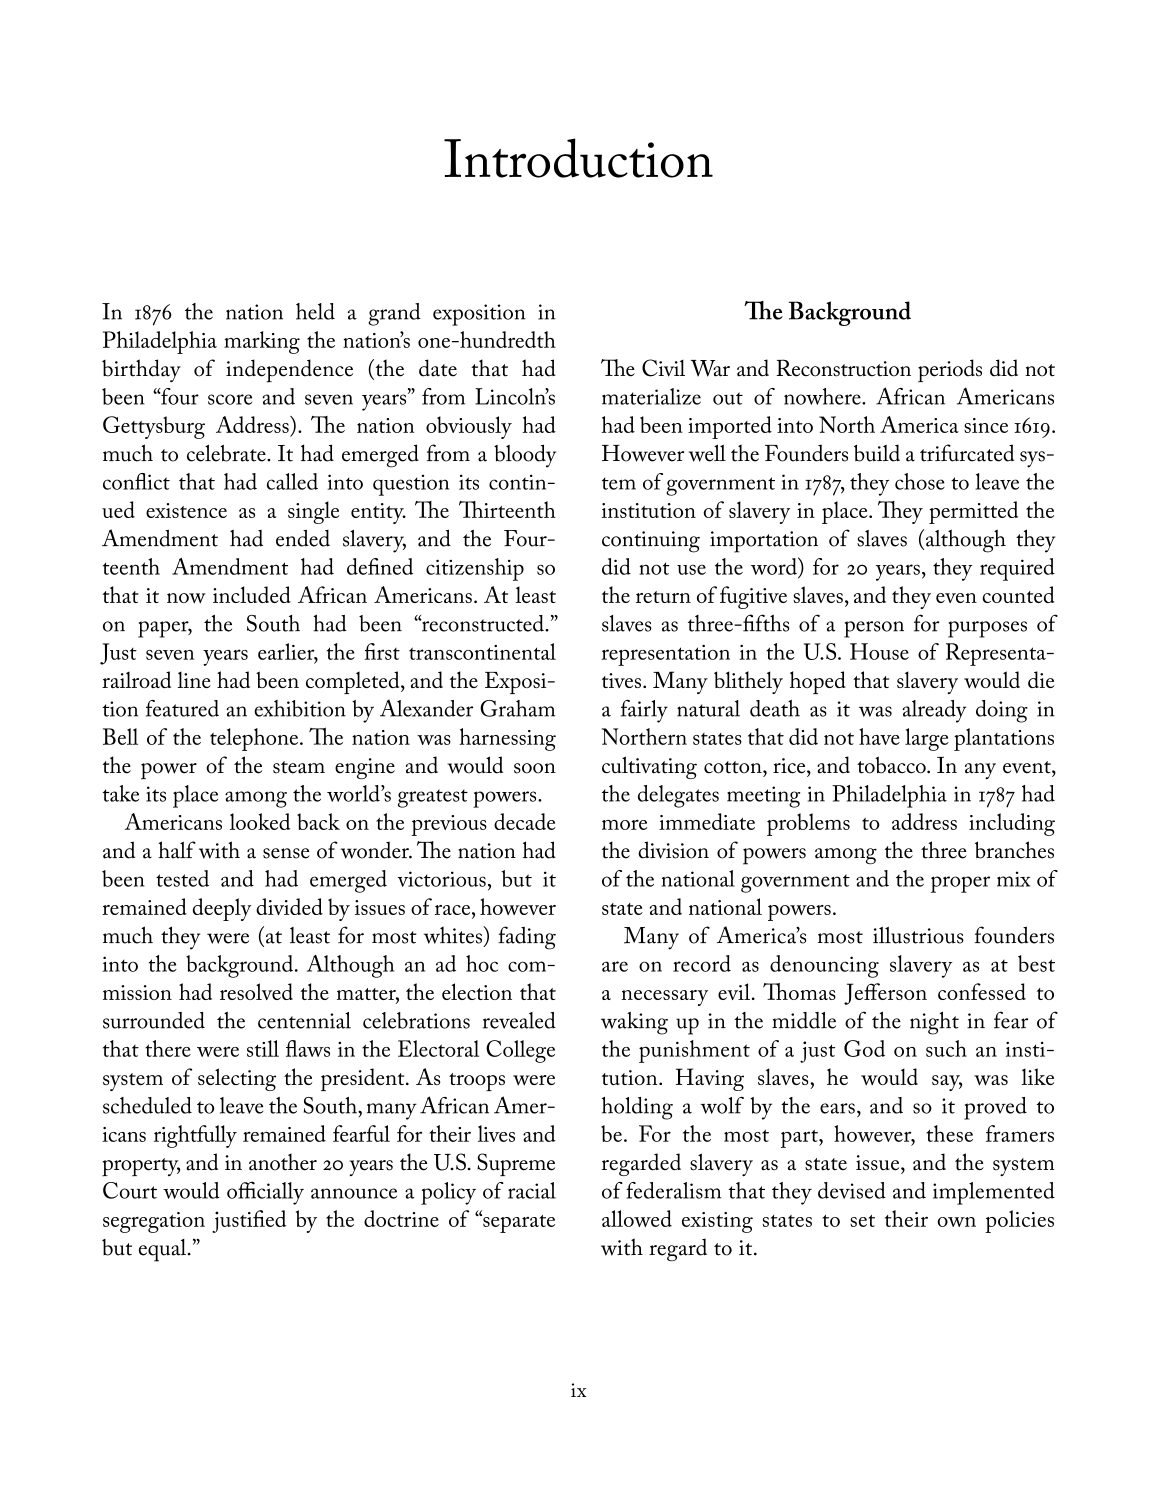 The Civil War and Reconstruction Eras: Documents Decoded page ix1